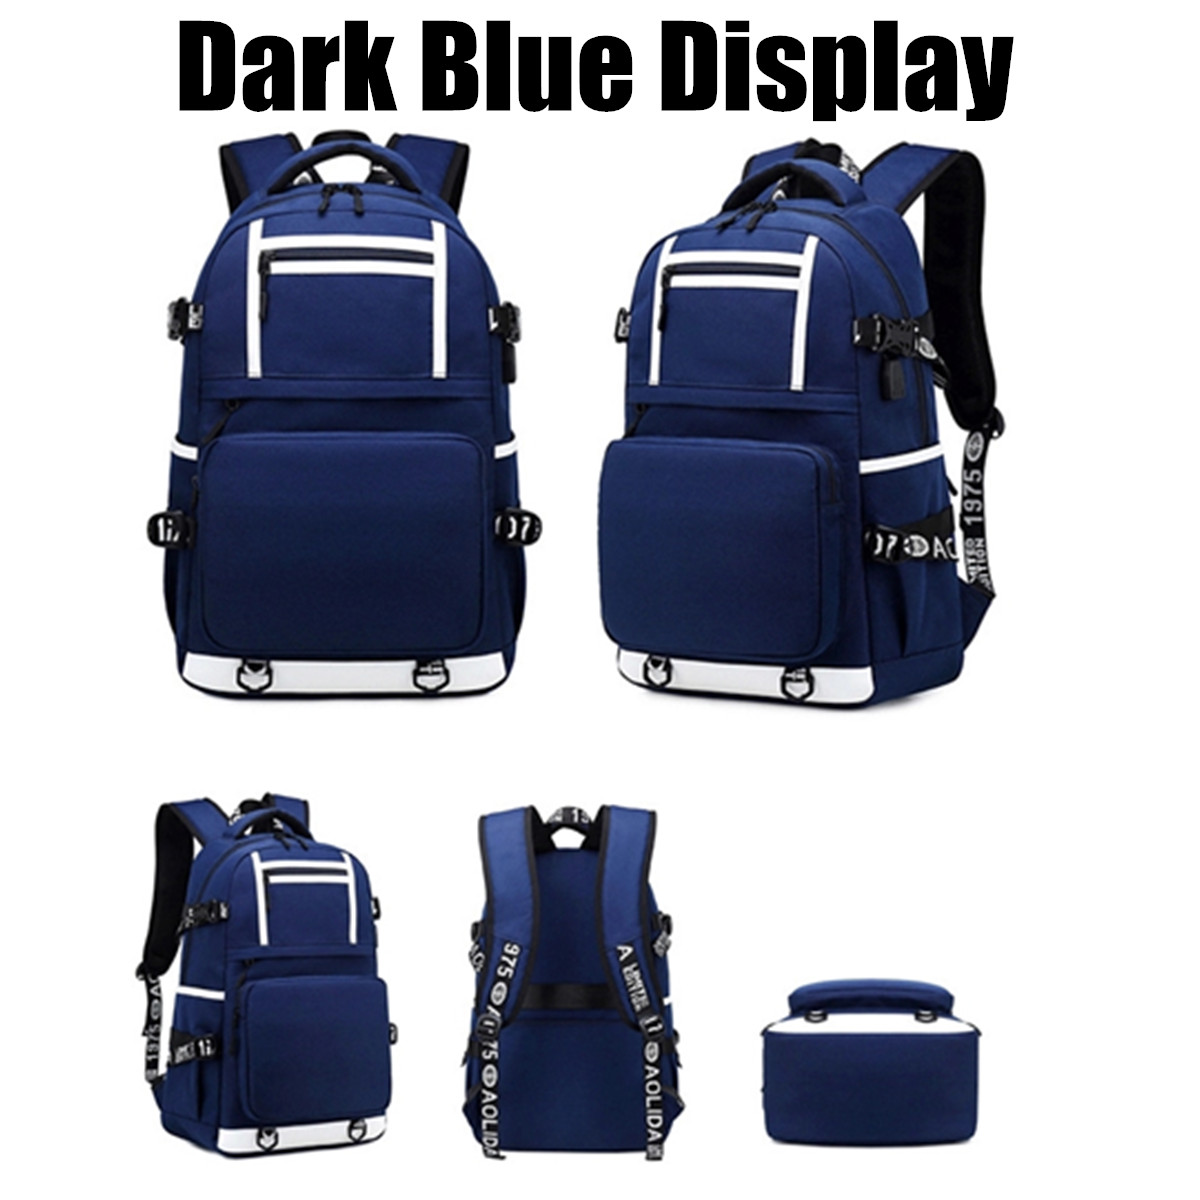 Oxford-Cloth-Waterproof-Laptop-Bag-Backpack-Travel-Bag-With-External-USB-Charging-Port-1509426-10